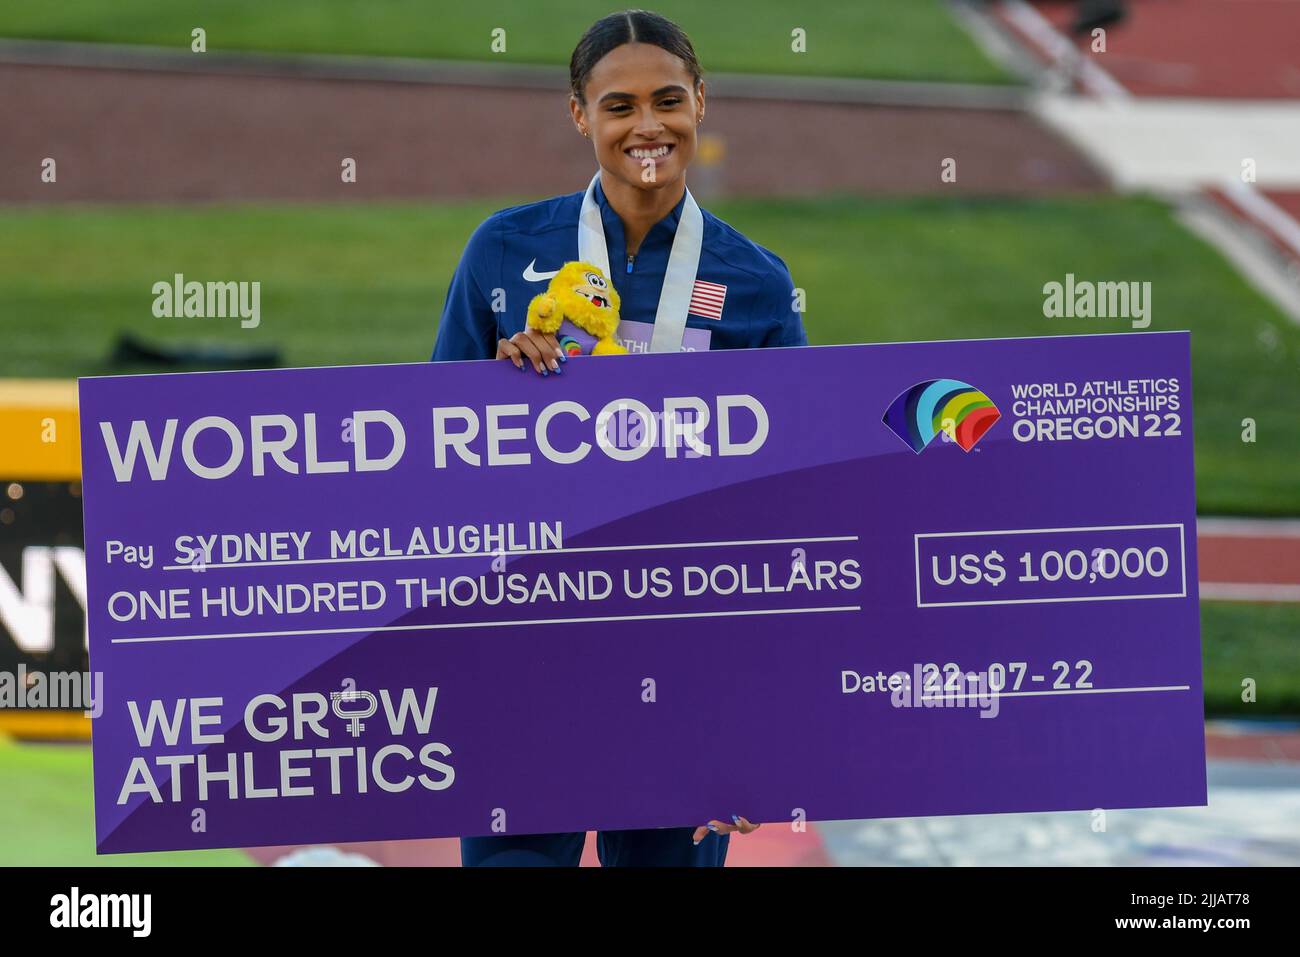 Sydney McLaughlin gold medalist on 400 meter hurdles in a new world record during the World